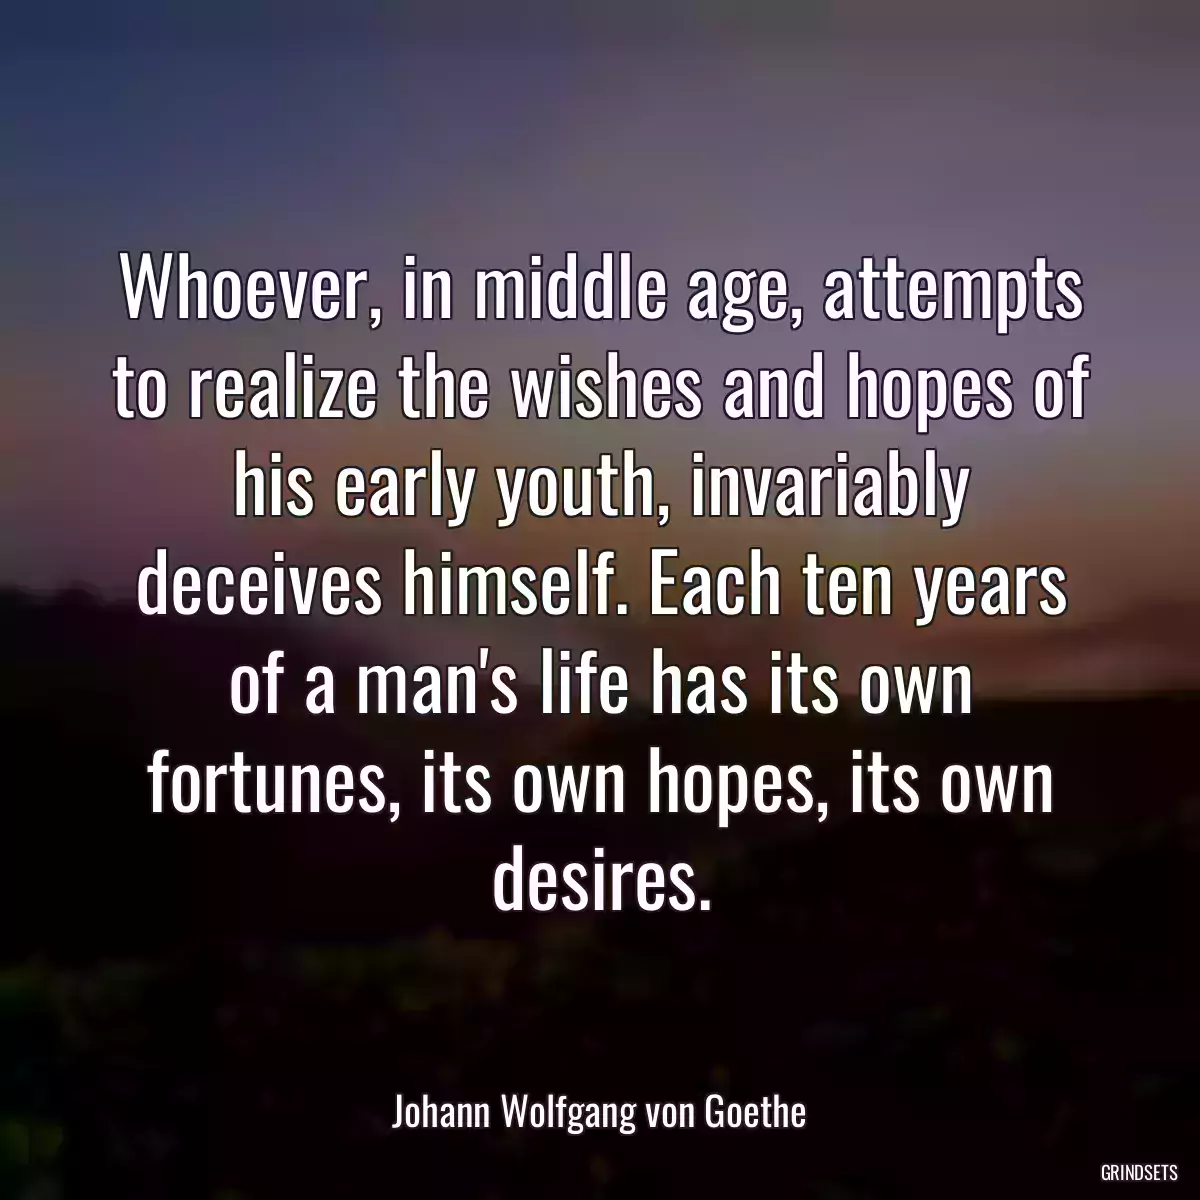 Whoever, in middle age, attempts to realize the wishes and hopes of his early youth, invariably deceives himself. Each ten years of a man\'s life has its own fortunes, its own hopes, its own desires.